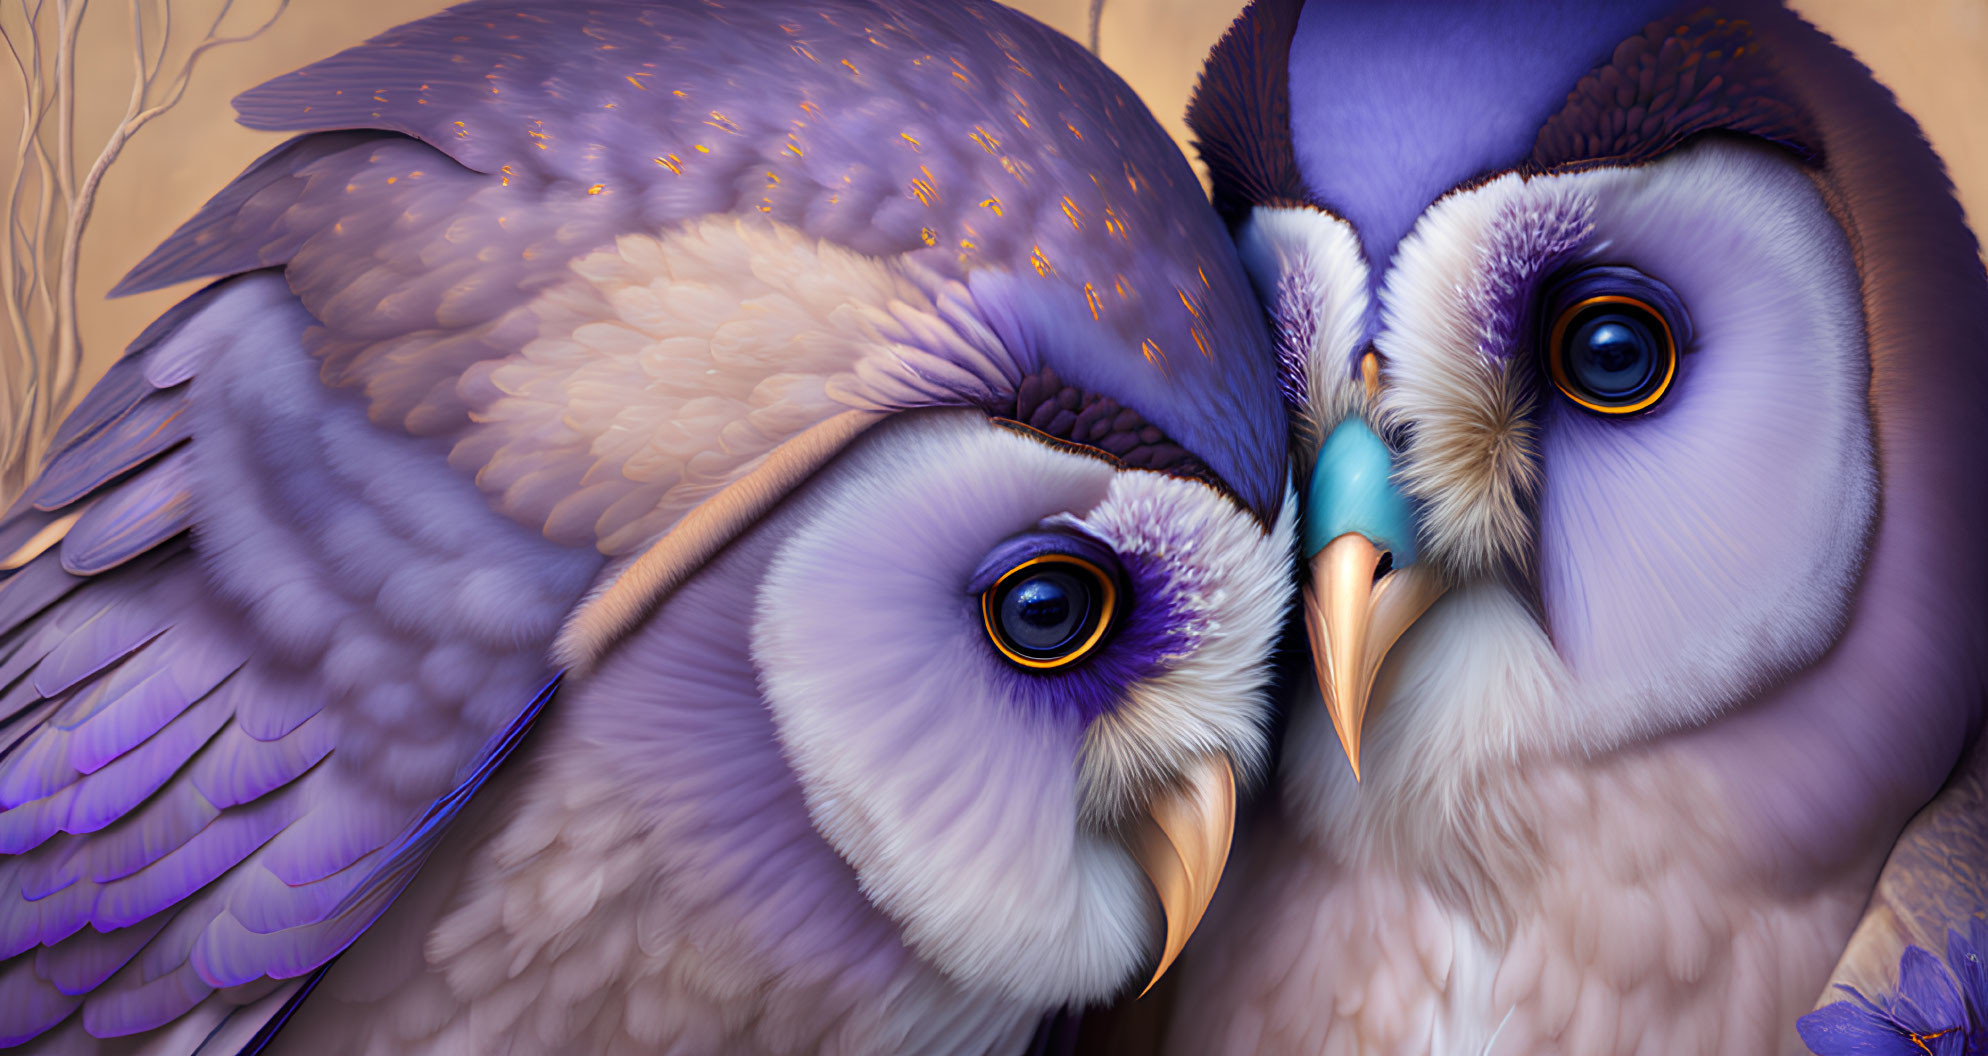 Vibrantly colored illustrated owls with detailed feathers in purple and brown hues